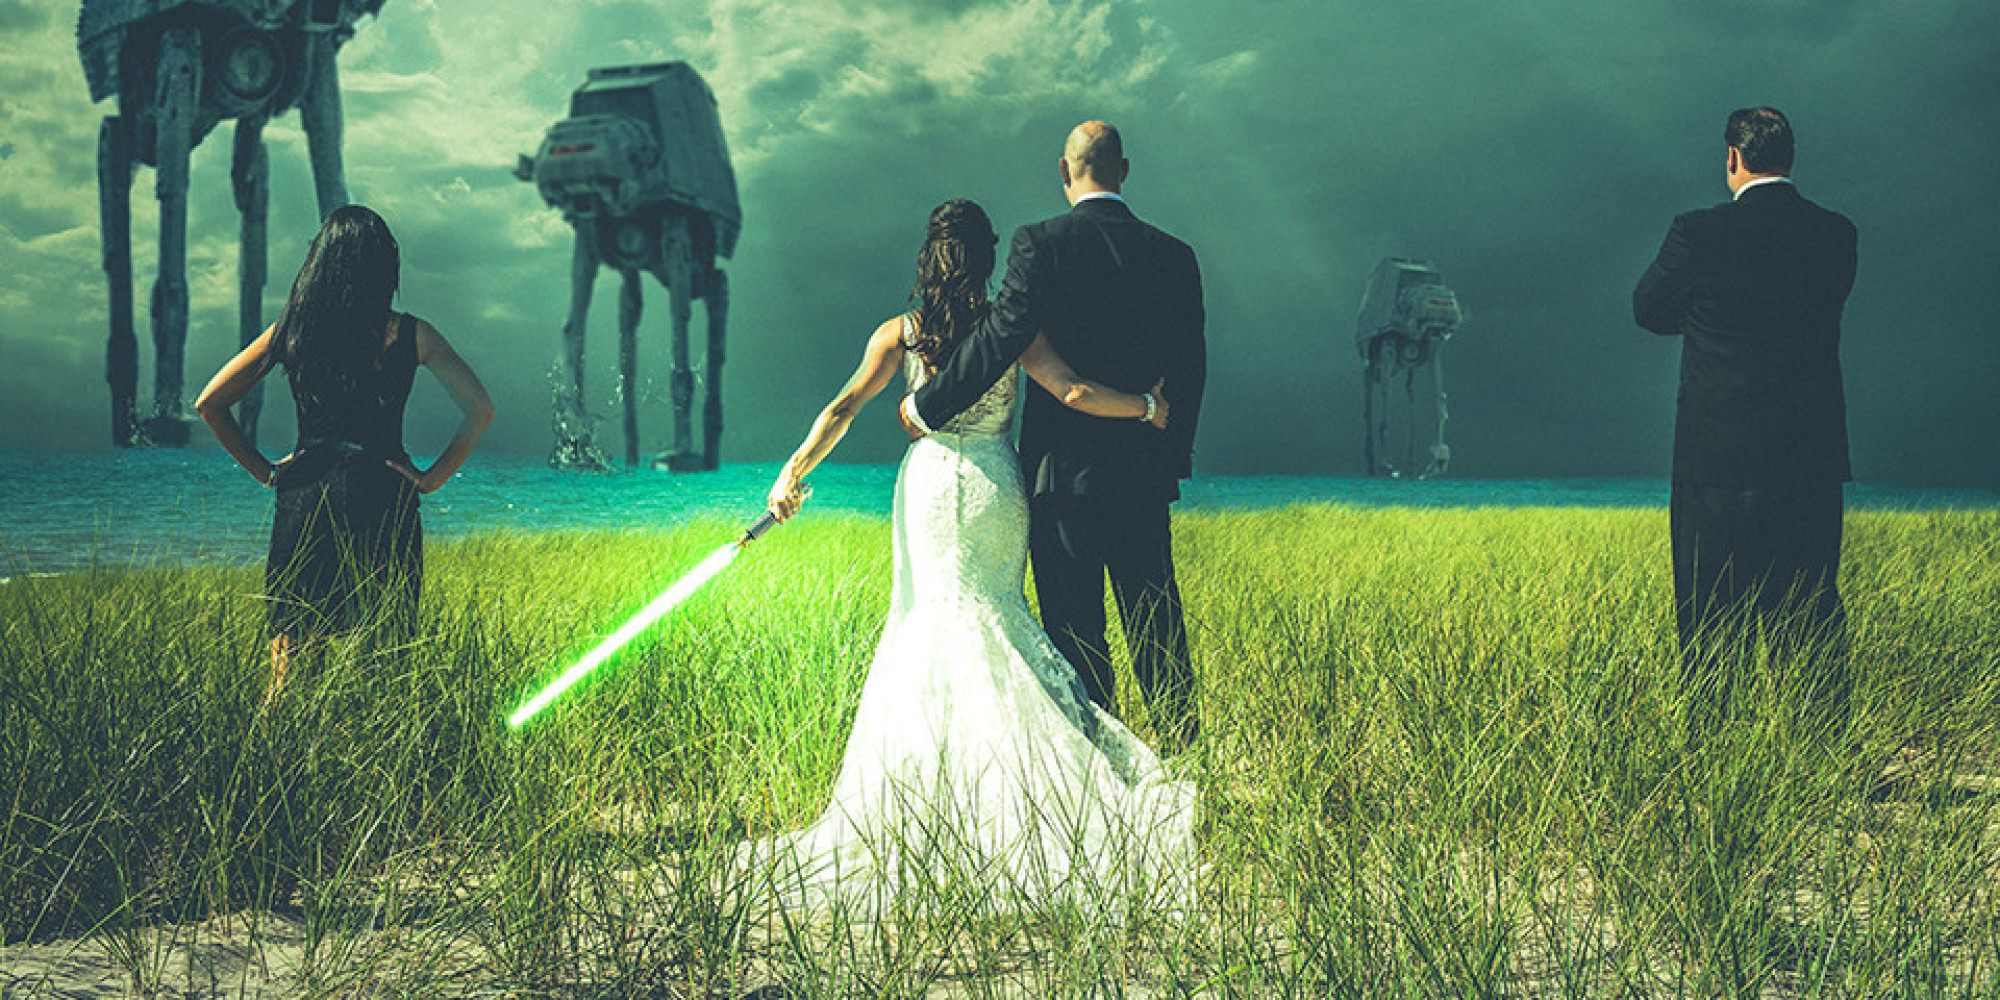 Everything You Need For A 'Star Wars' Wedding, Minus The Evil Sith Lord